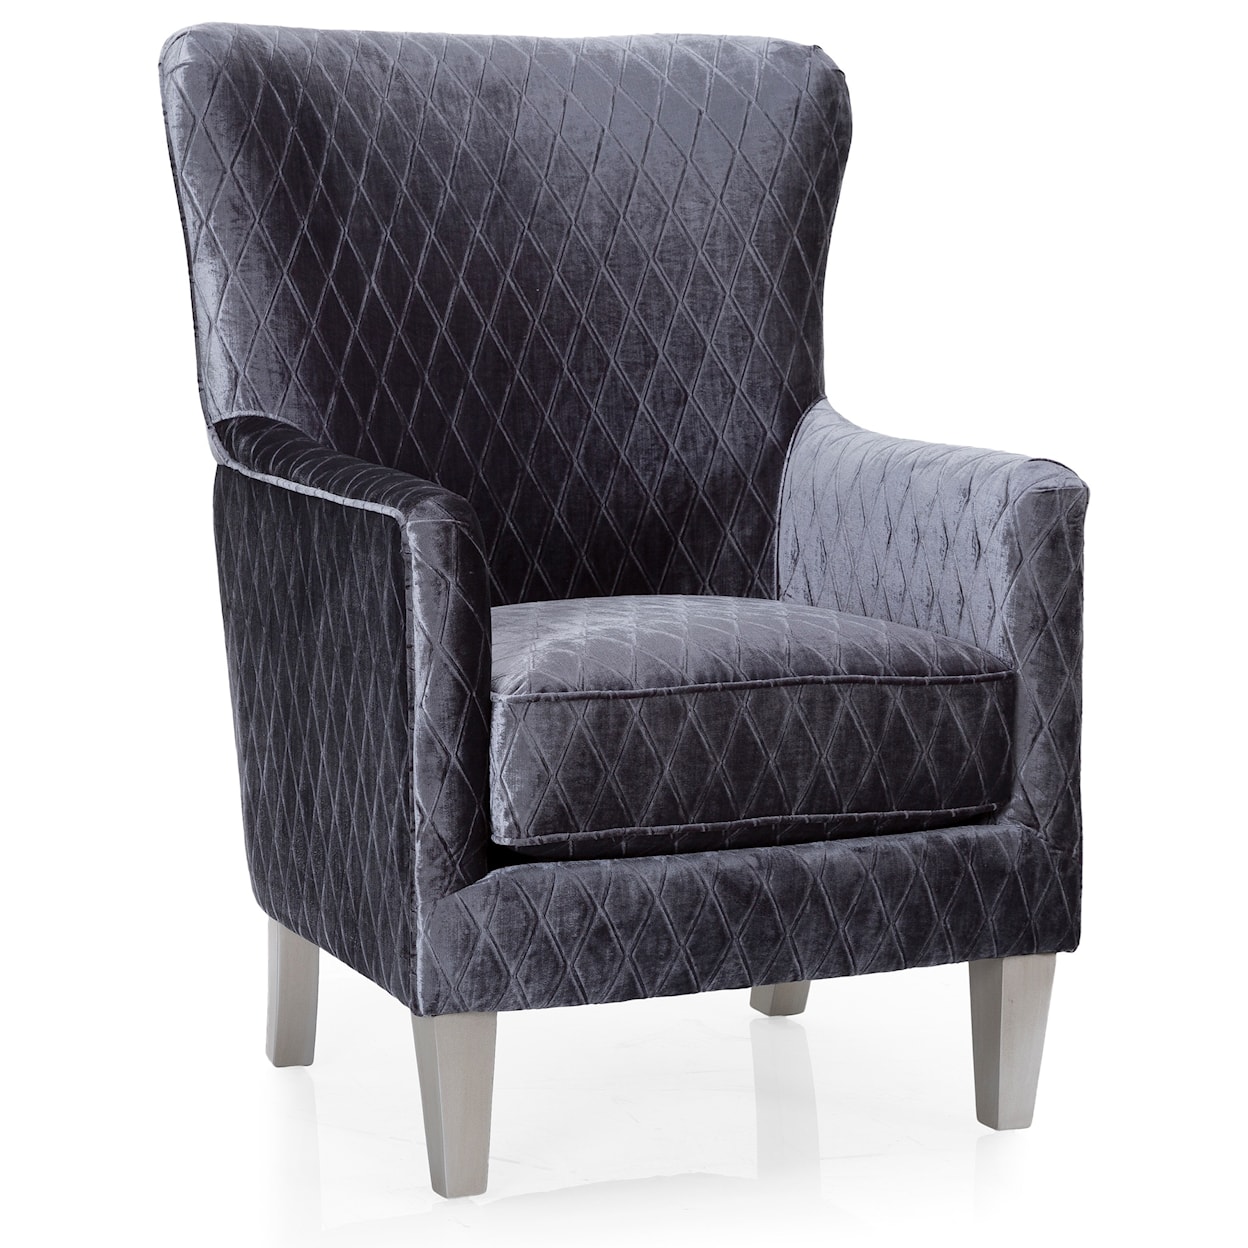 Taelor Designs 2379 Contemporary Wing Back Chair